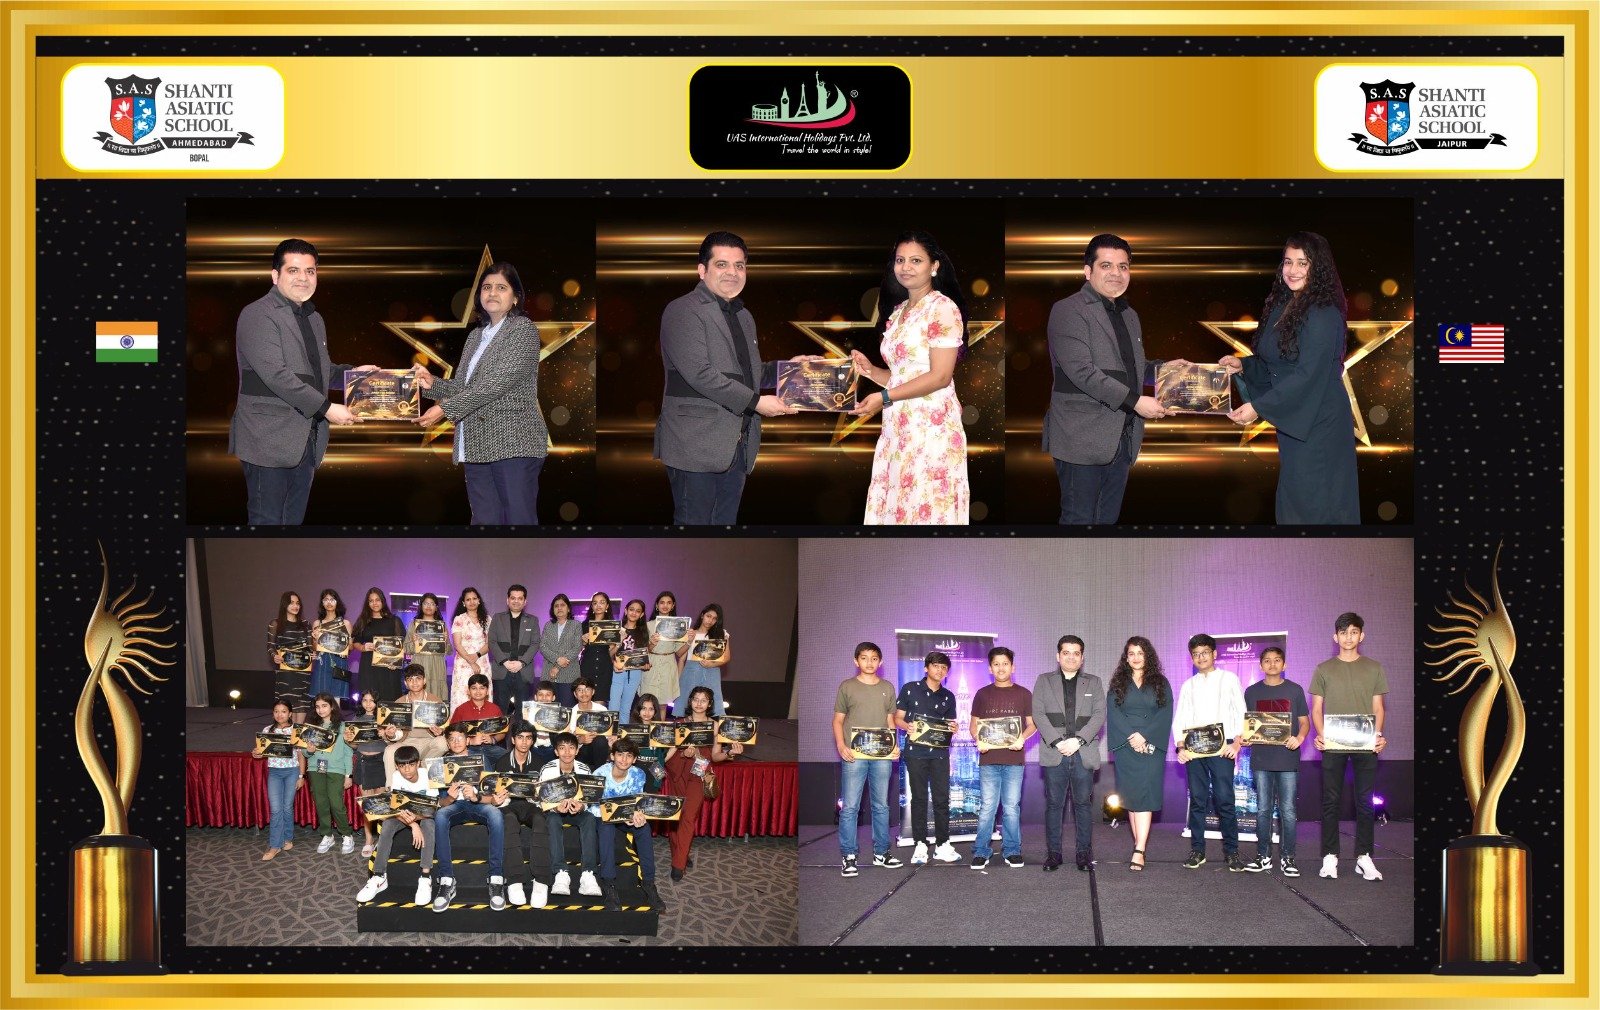 Premier World | Ishan Taneja, Visionary MD and CEO of UAS International, Honors Achievements of Shanti Asiatic School in Malaysia Global Immersion Program